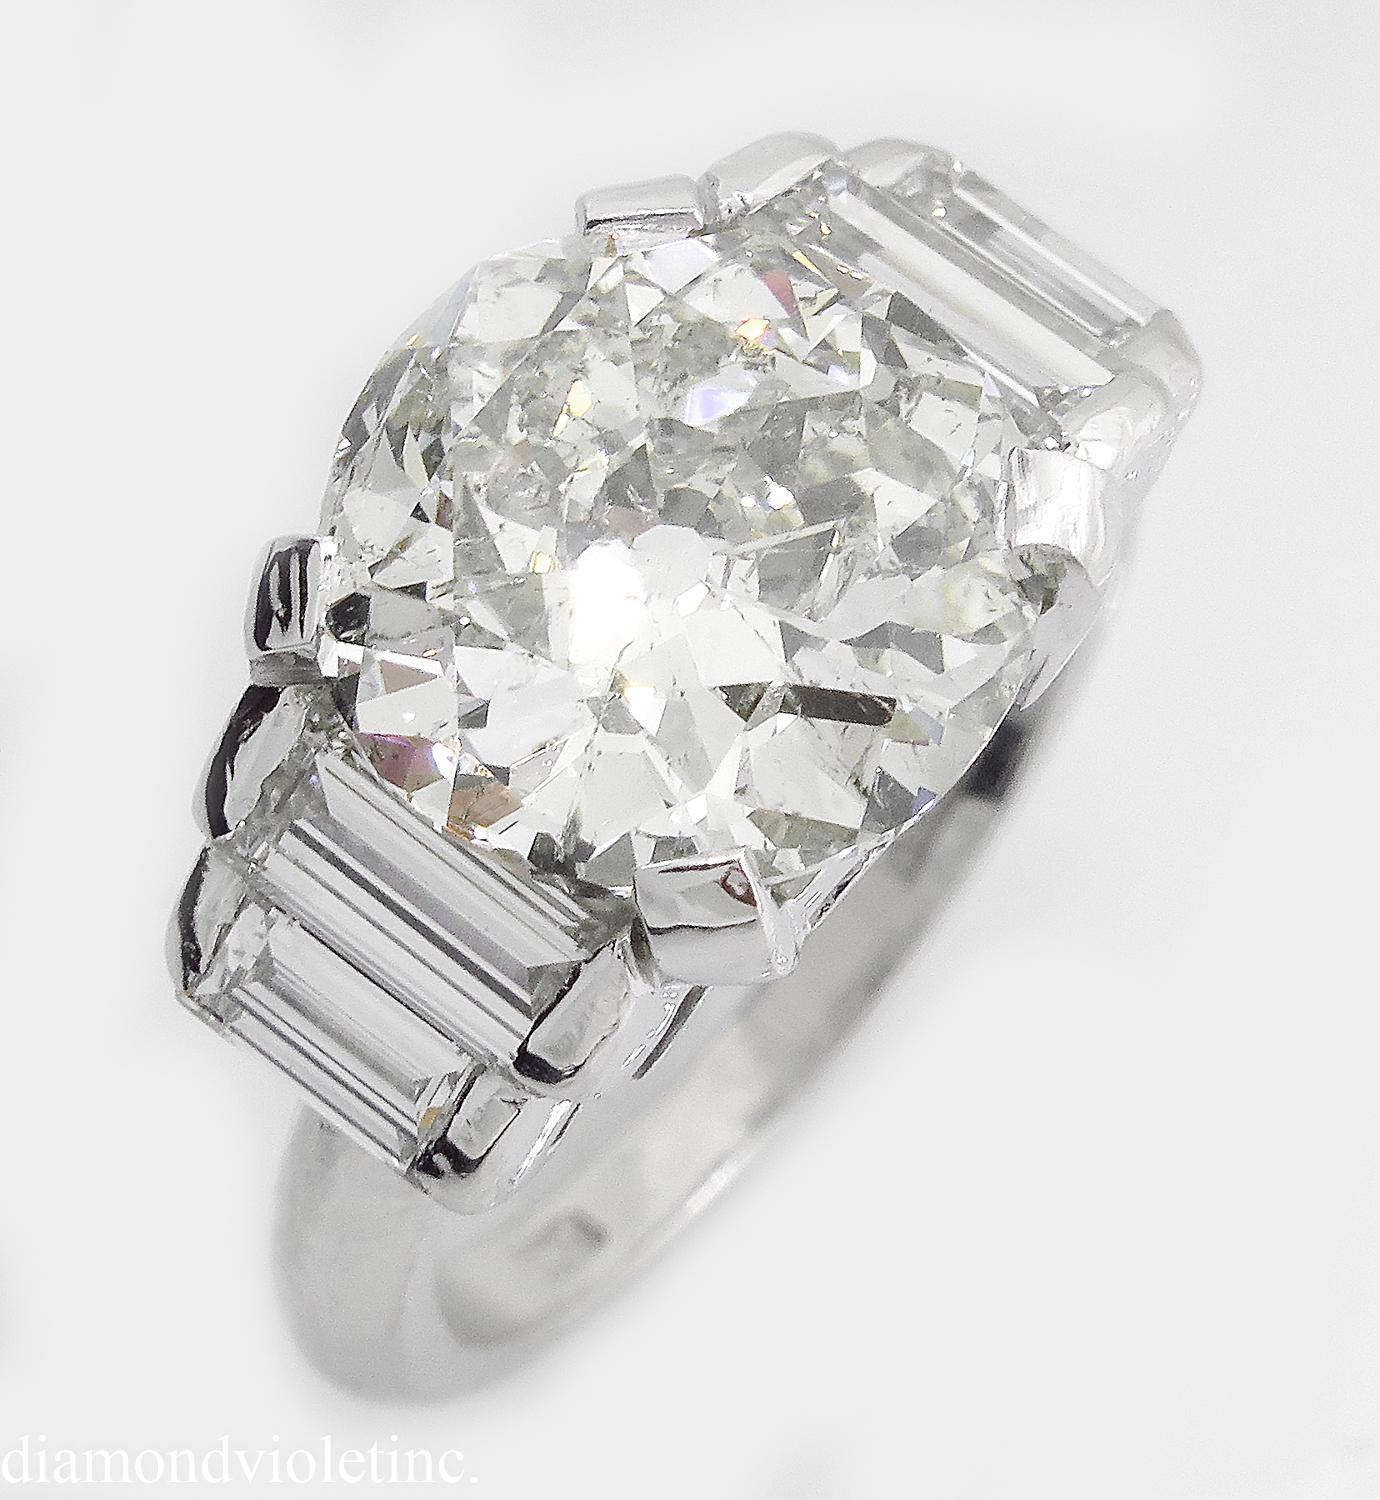 A Breathtaking Estate Vintage HANDMADE 18K White Gold (stamped) Engagement ring dazzles EGL USA certified 4.01ct Old European center diamond in J-K color SI2 clarity; with measurements of 10.16x10.12x5.50mm.
It is set with 4 Vertically set Step cut